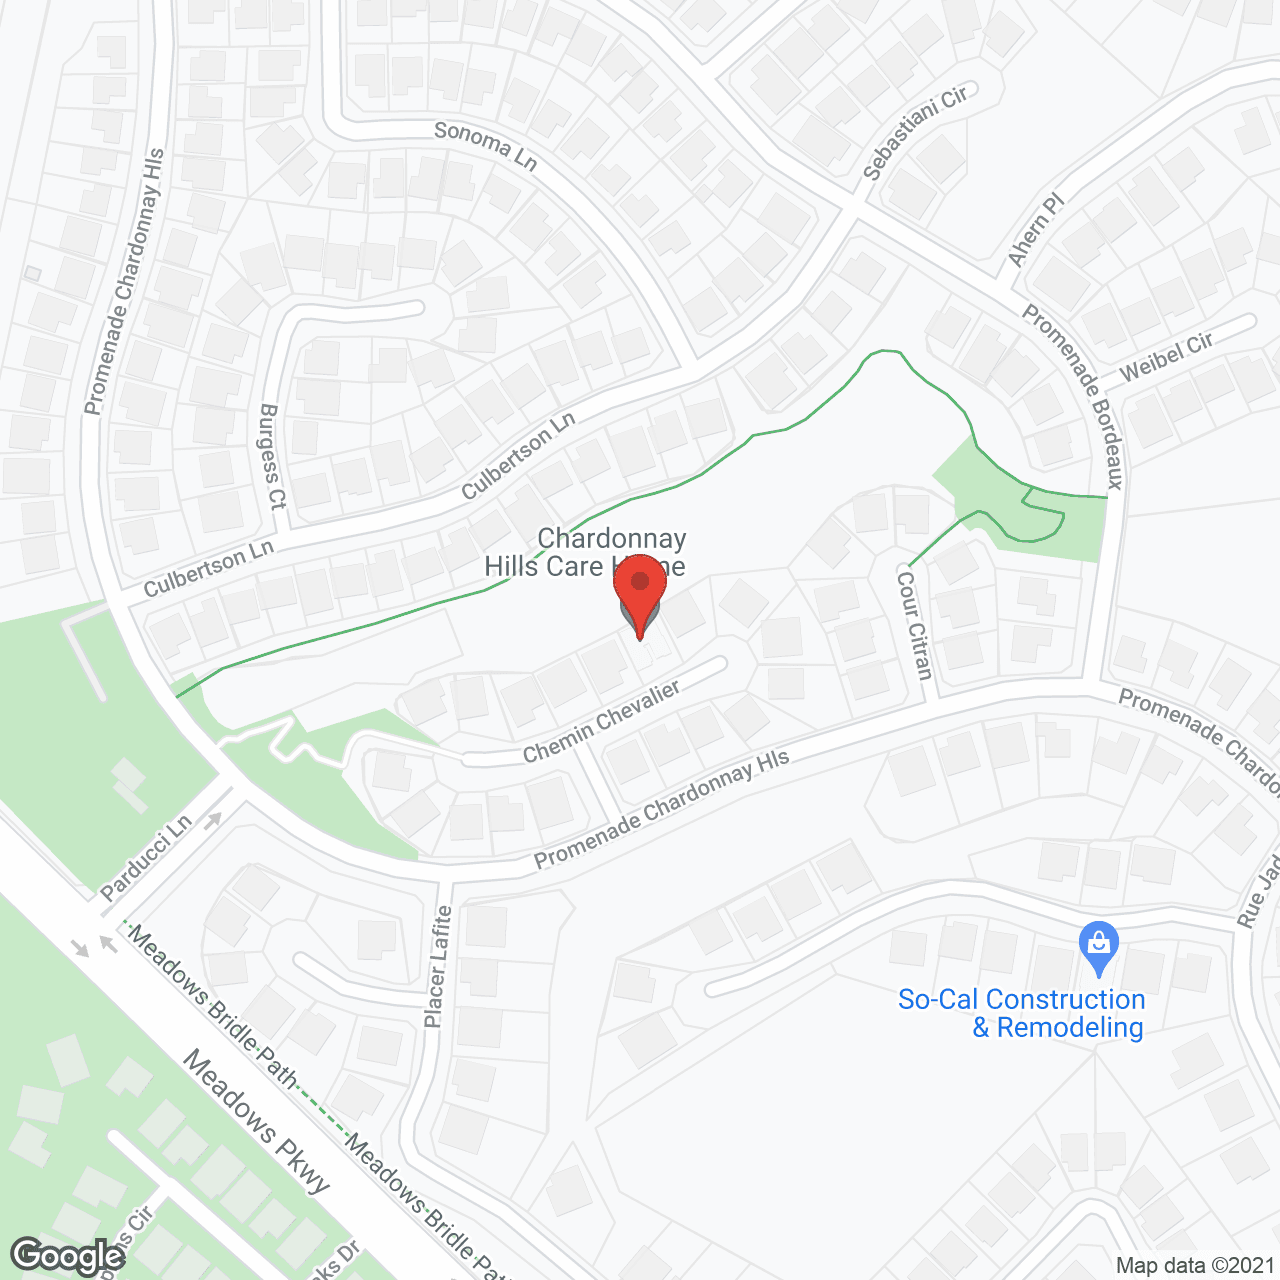 Chardonnay Hills Care Home in google map